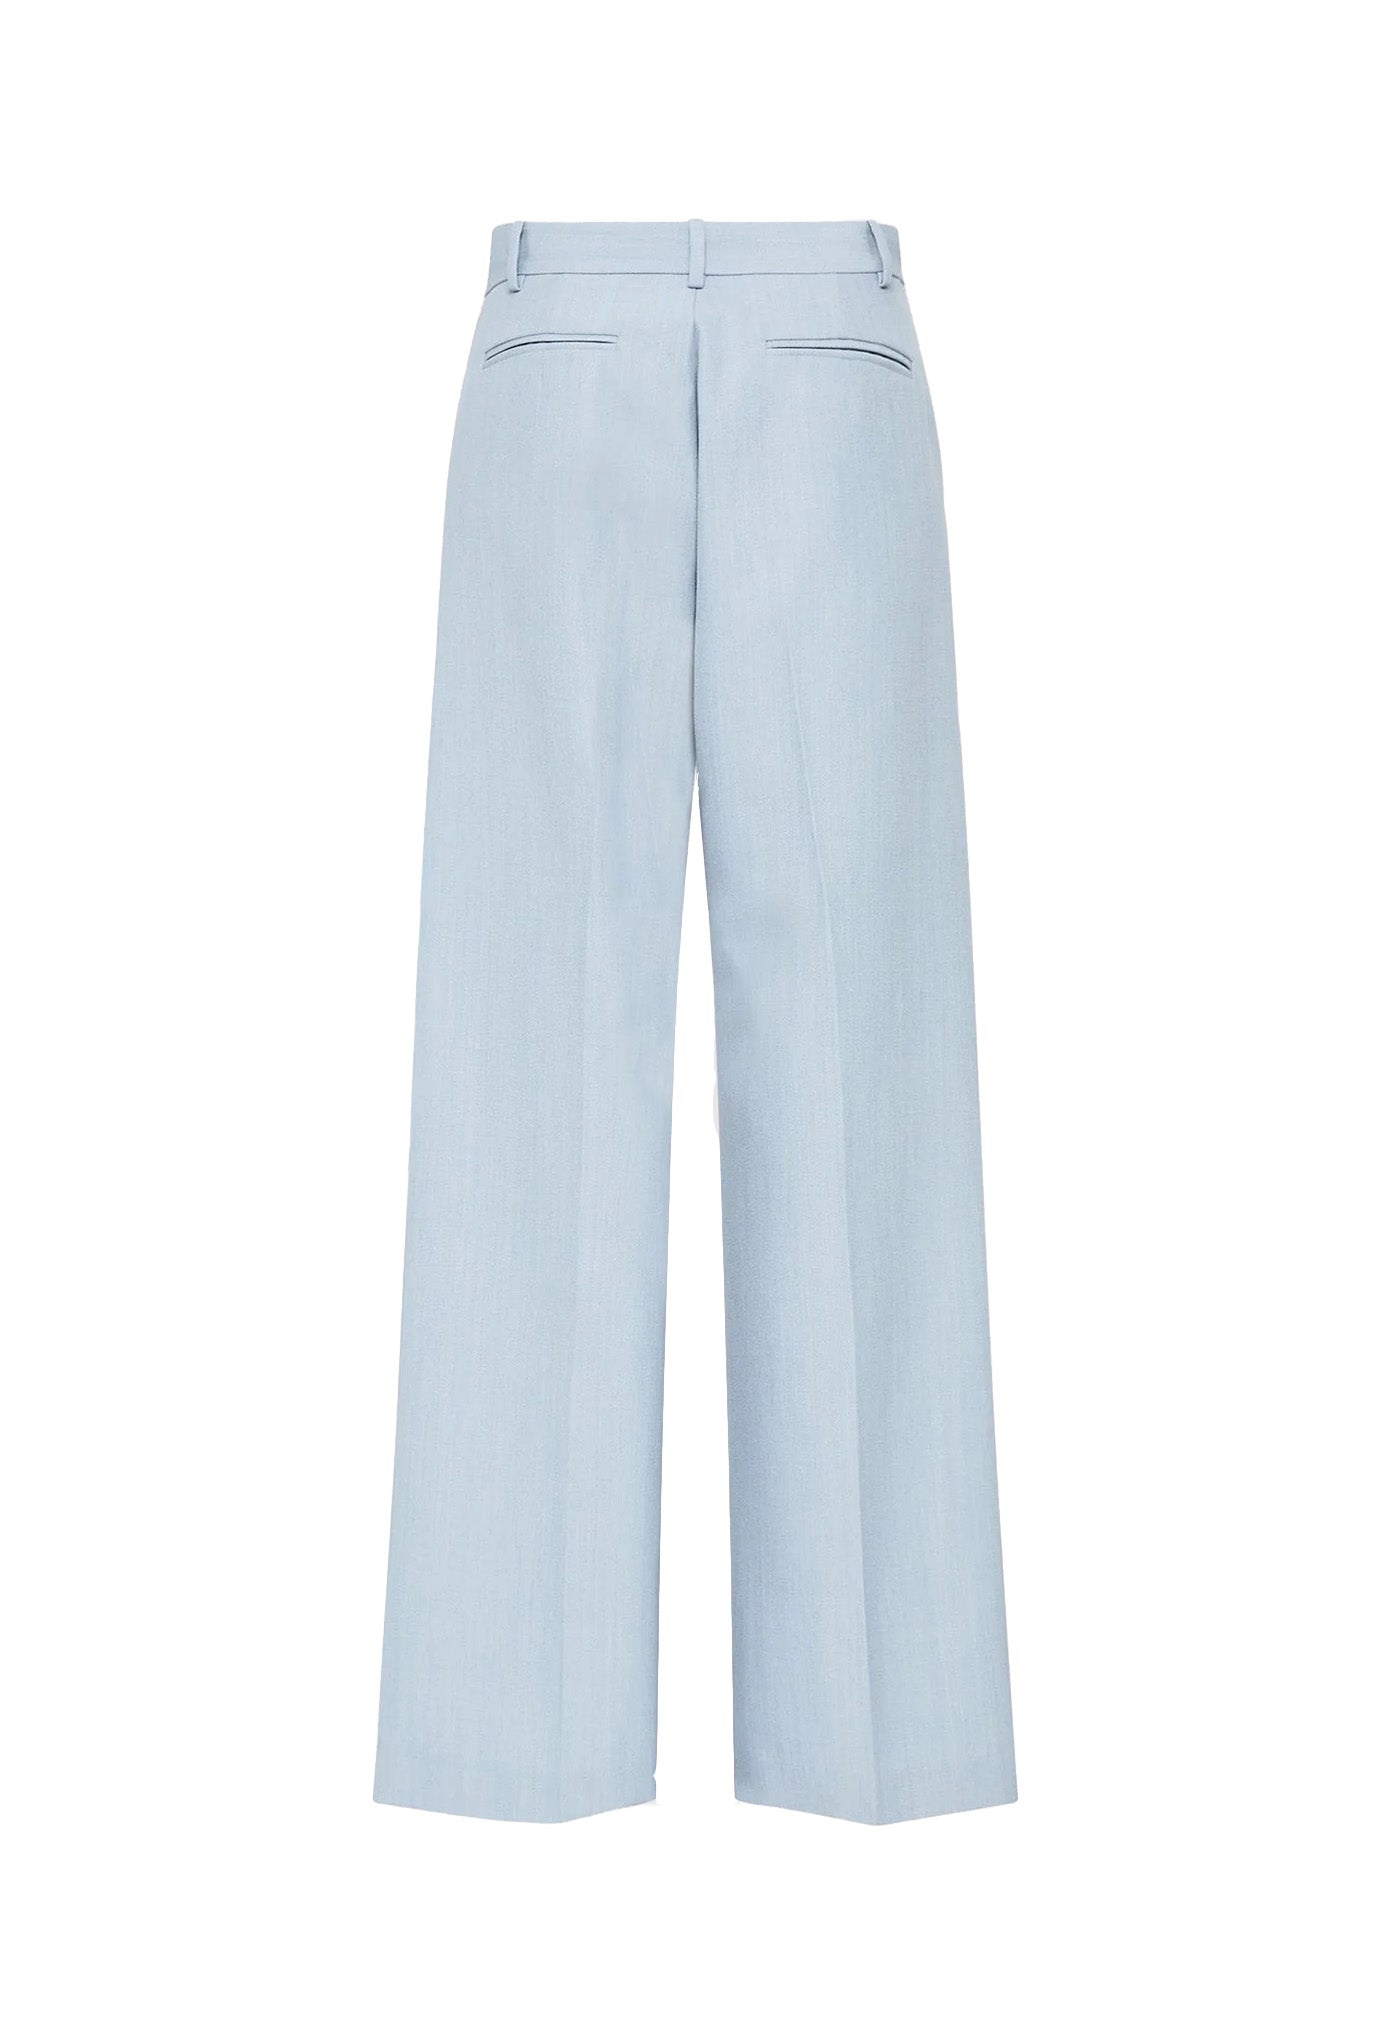 Carter Trousers - Stone Blue sold by Angel Divine